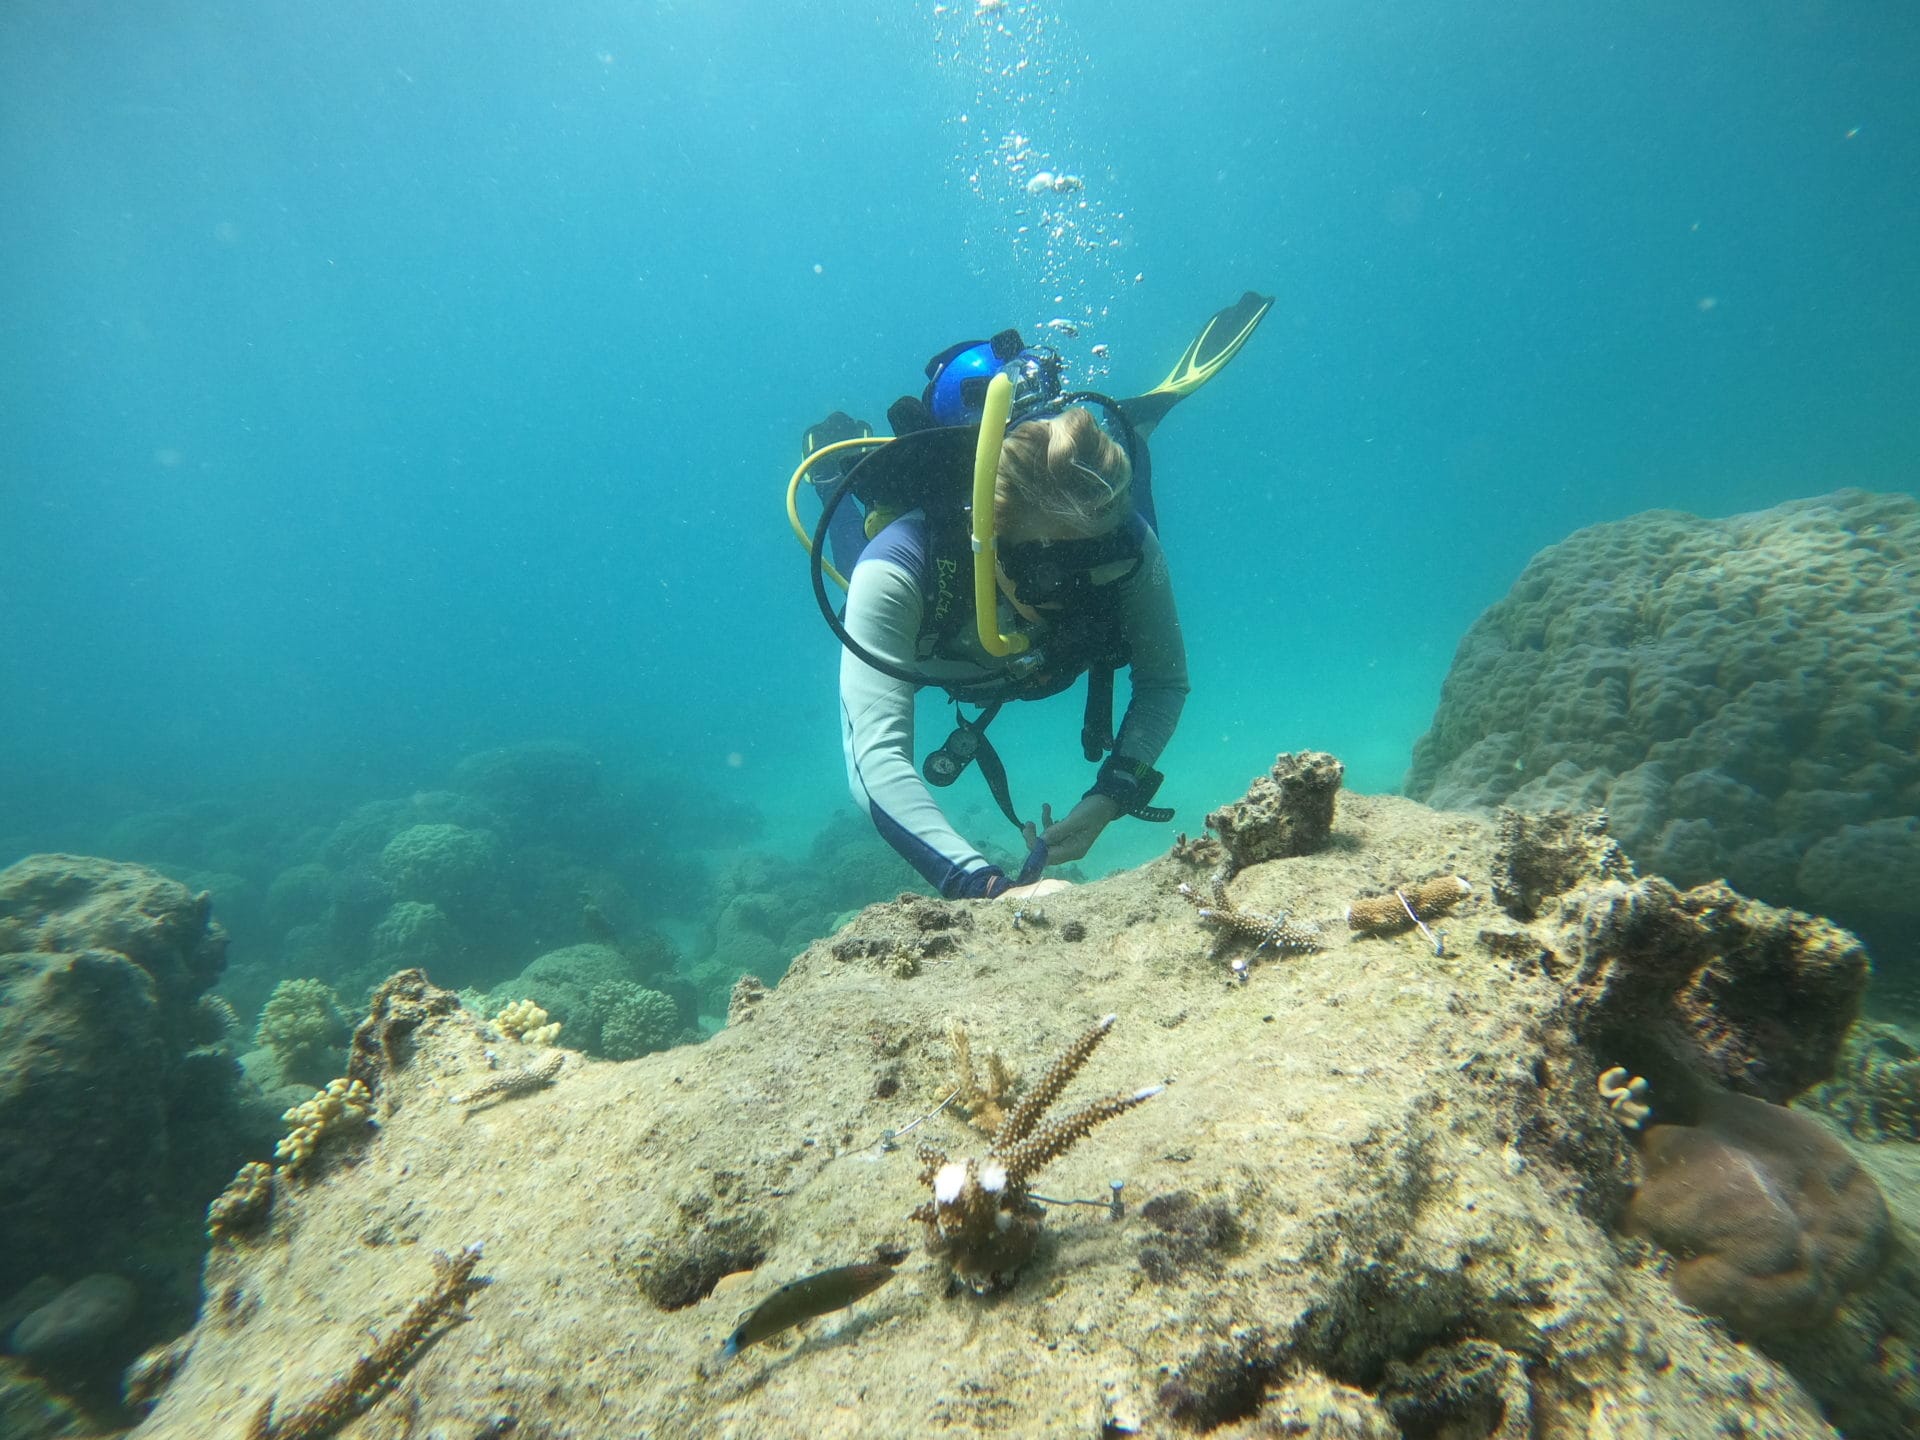 Underwater photo of diver attaching coral to reef crop on 31 Jan 20